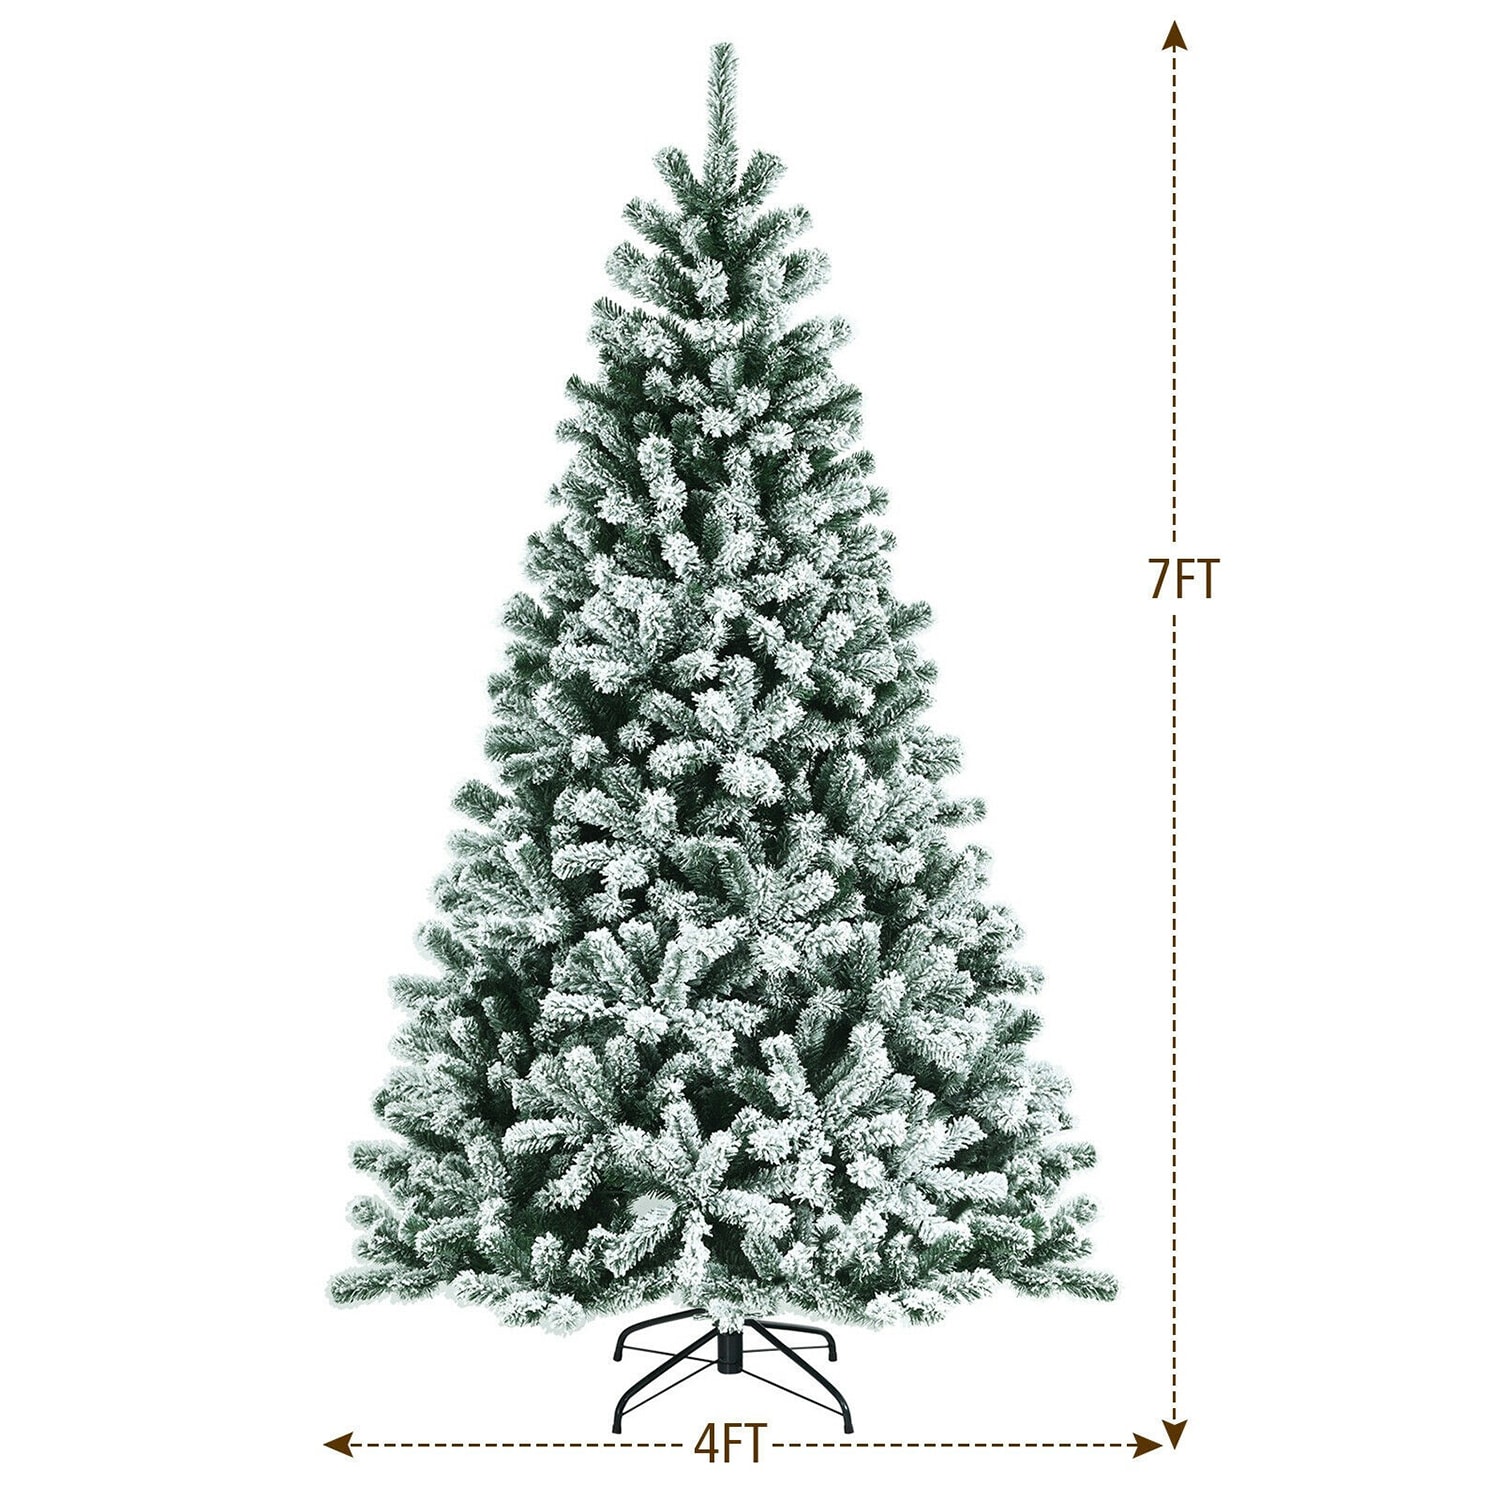 Costway 6ft Pre-lit Hinged Christmas Tree w/ Remote Control & 9 Lighting  Modes